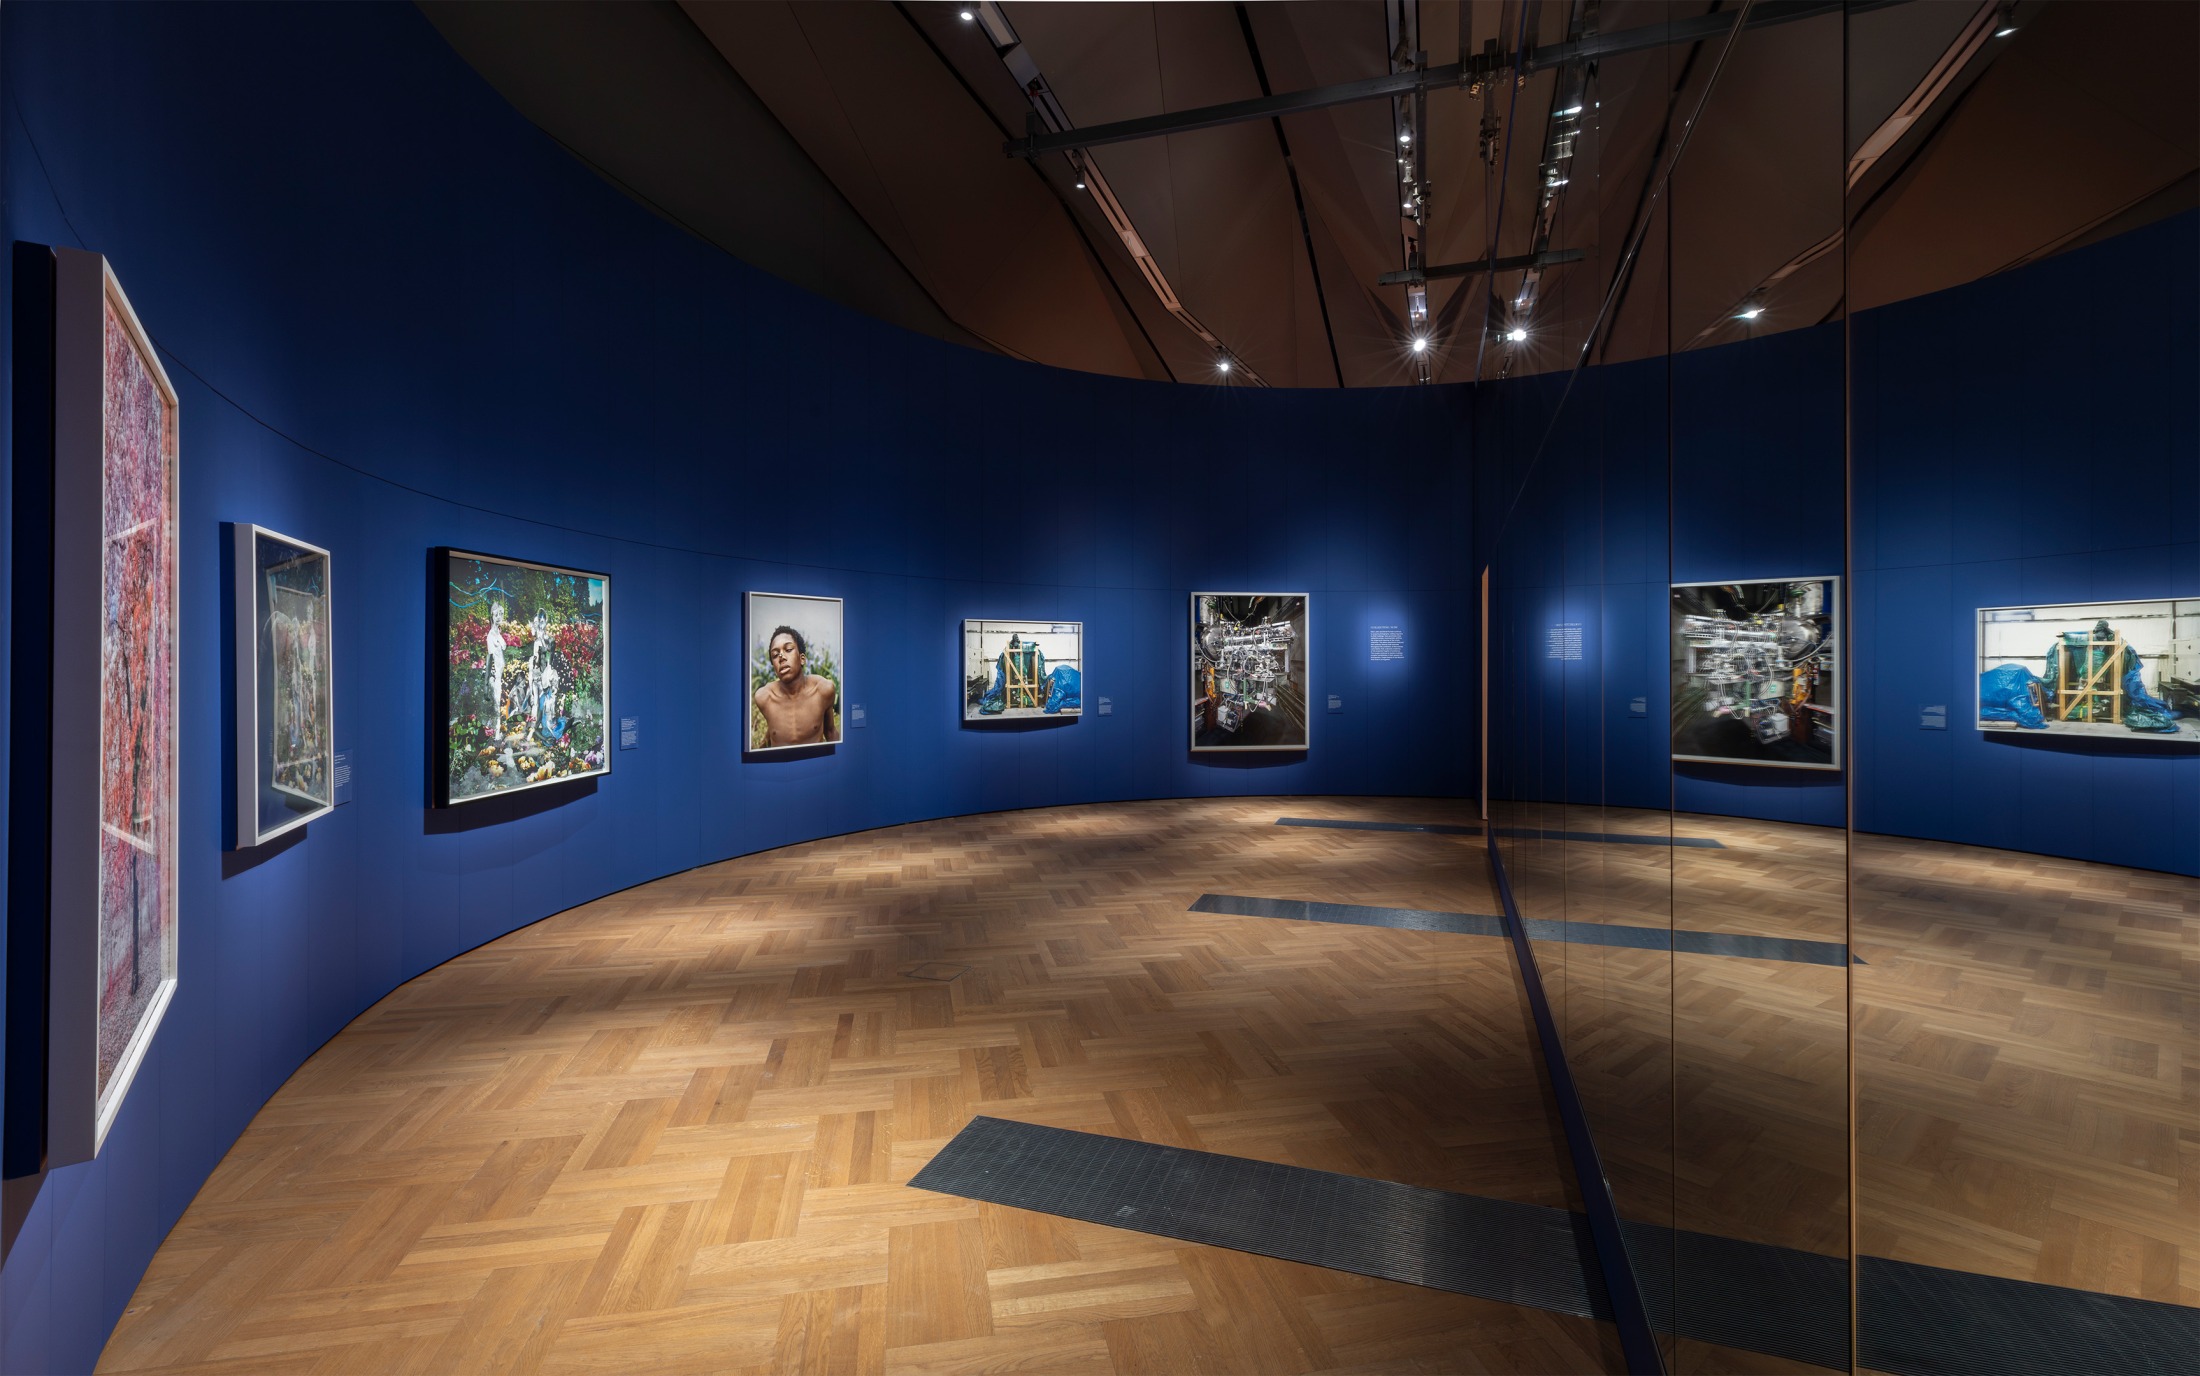 Installation view: Fragile Beauty, V&A South Kensington © Victoria and Albert Museum, London